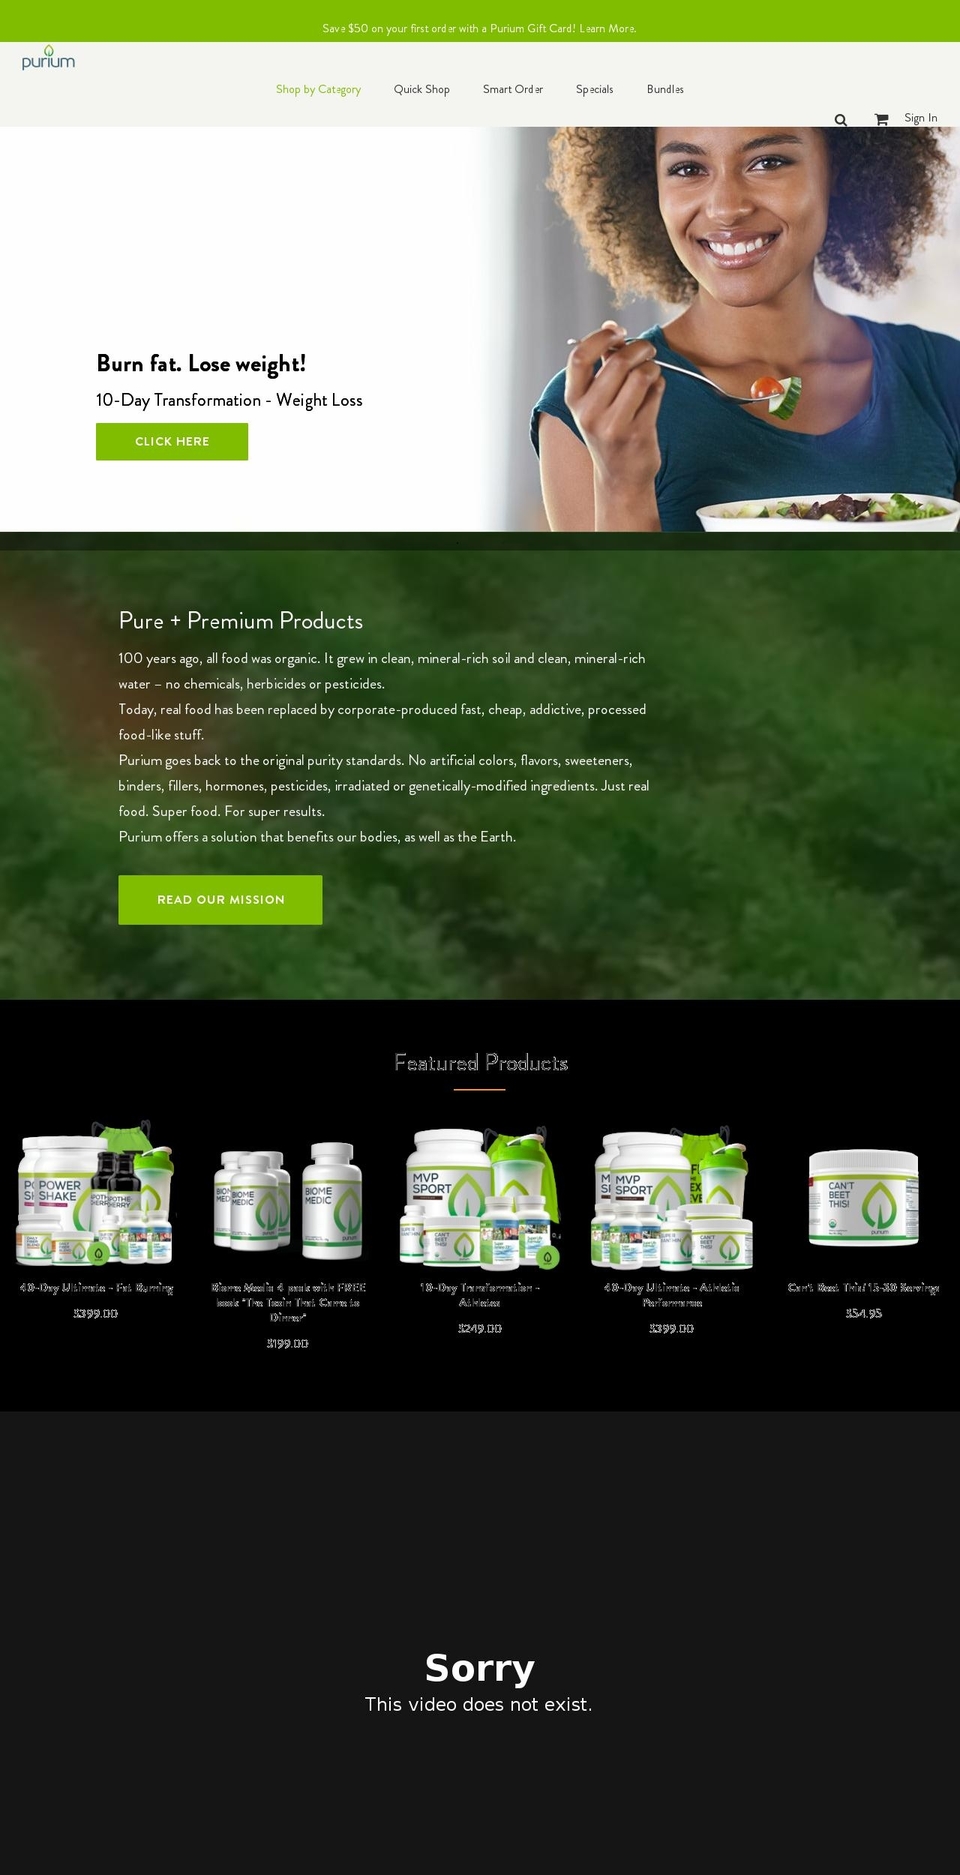 Production | BVA Shopify theme site example healthyliving10.com